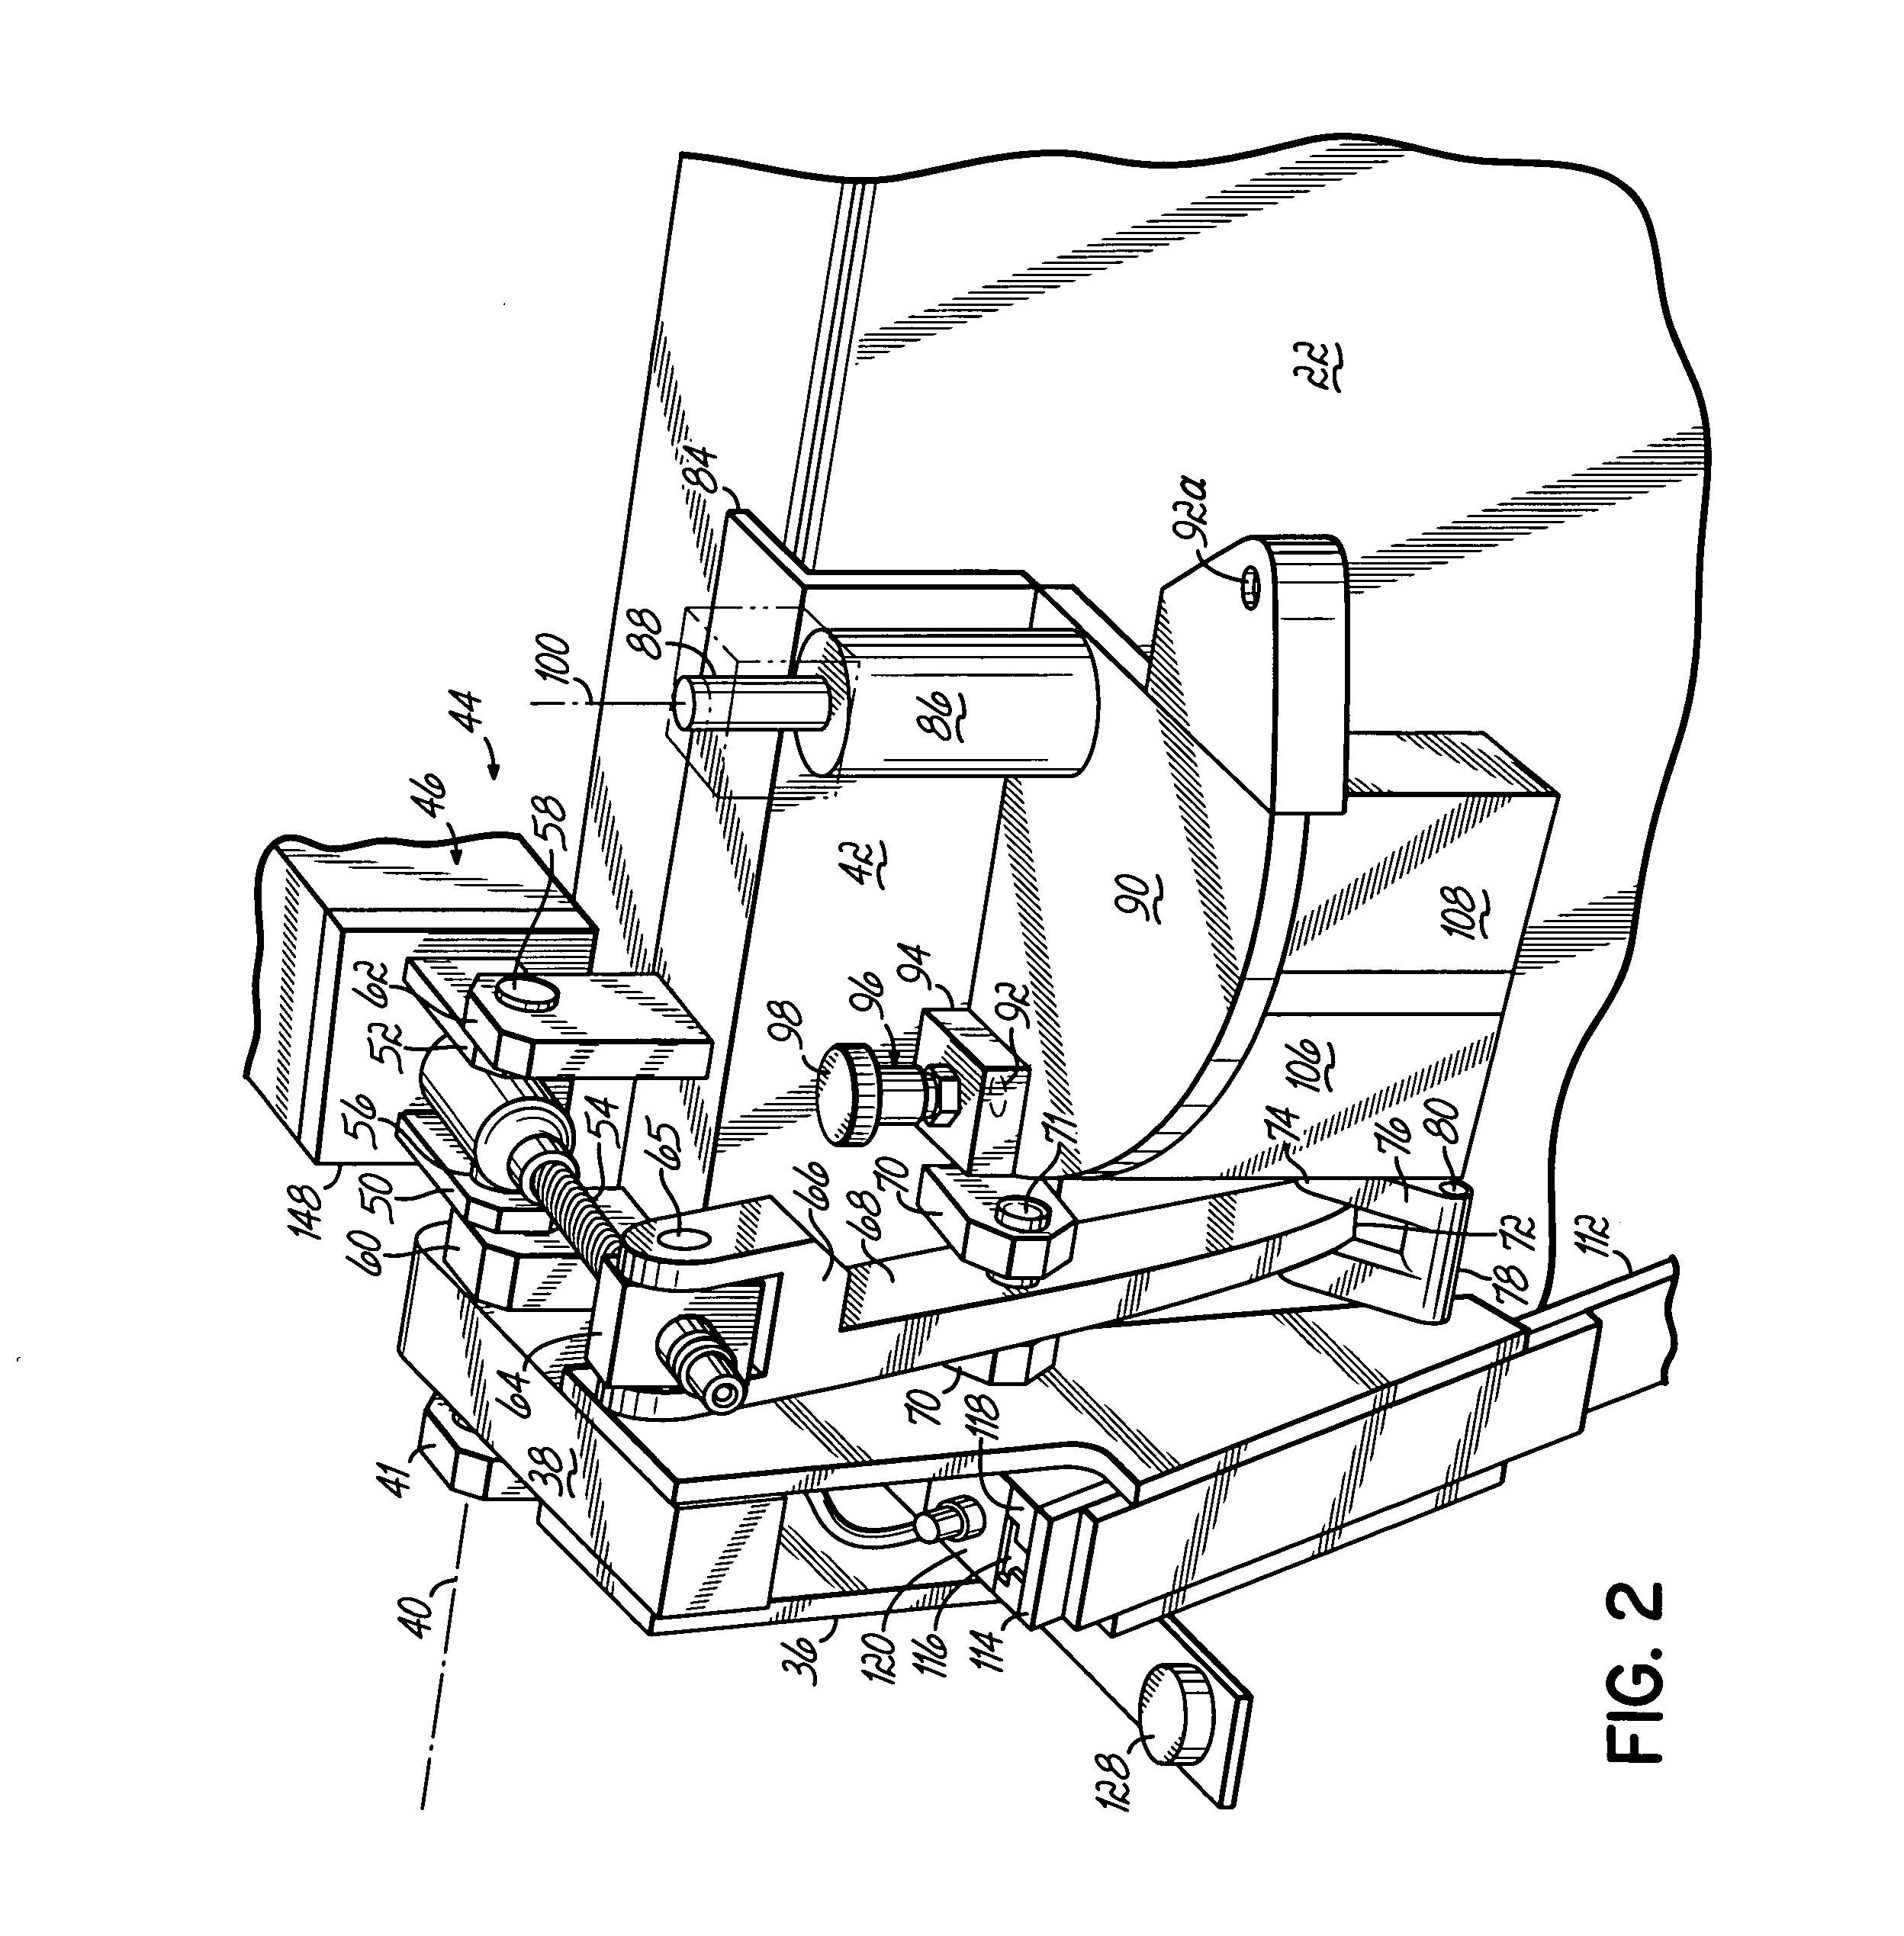 Programmable tucking attachment for a sewing machine and method